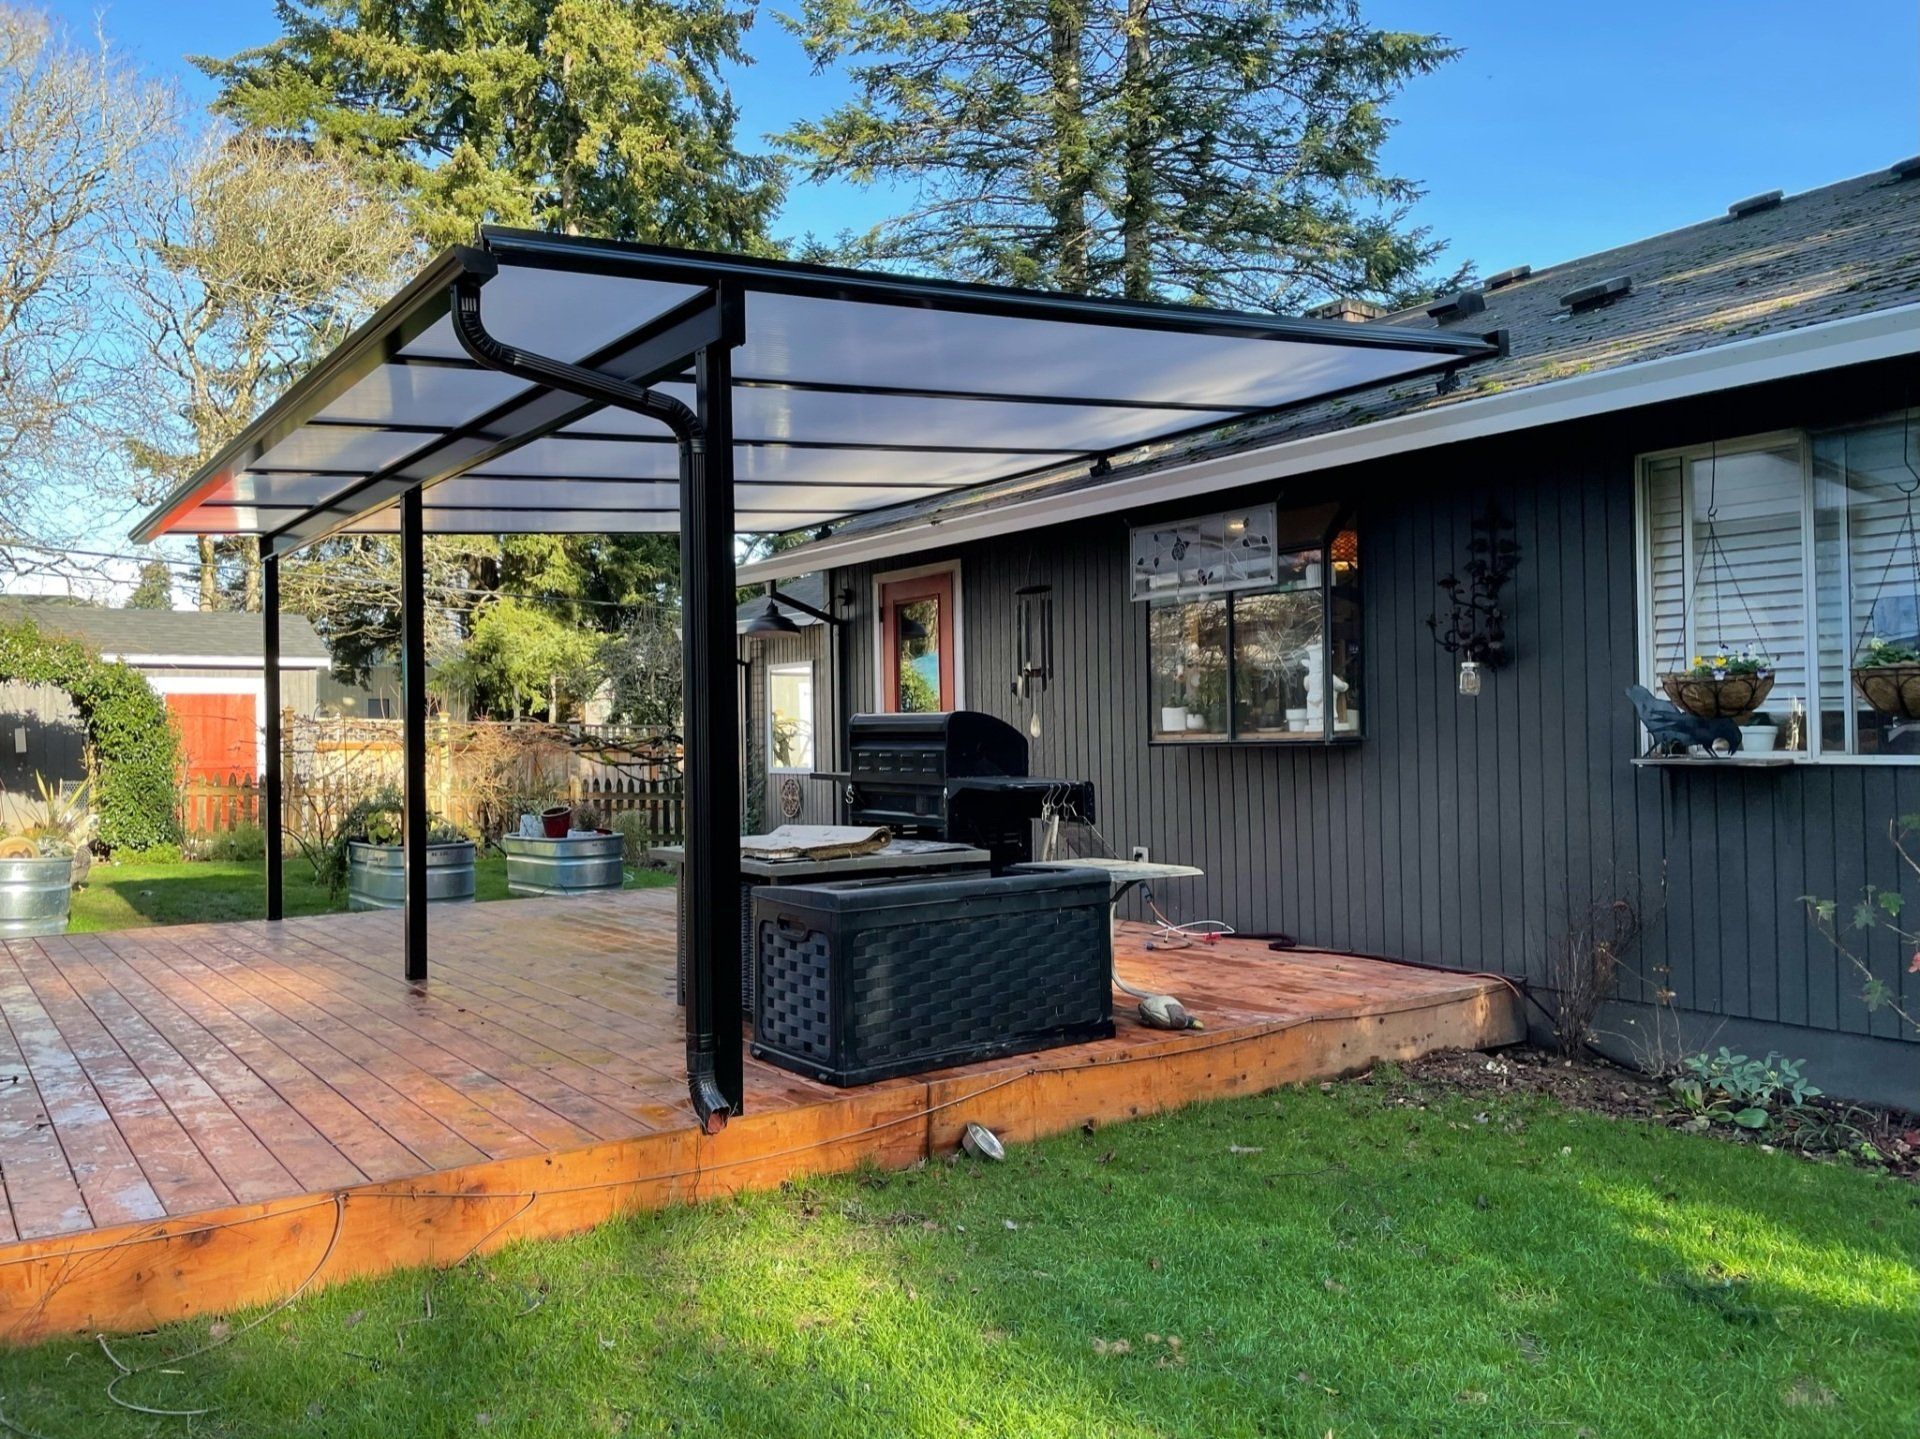 Patio Covers Tigard Oregon - Shed Style Patio Covers Portland